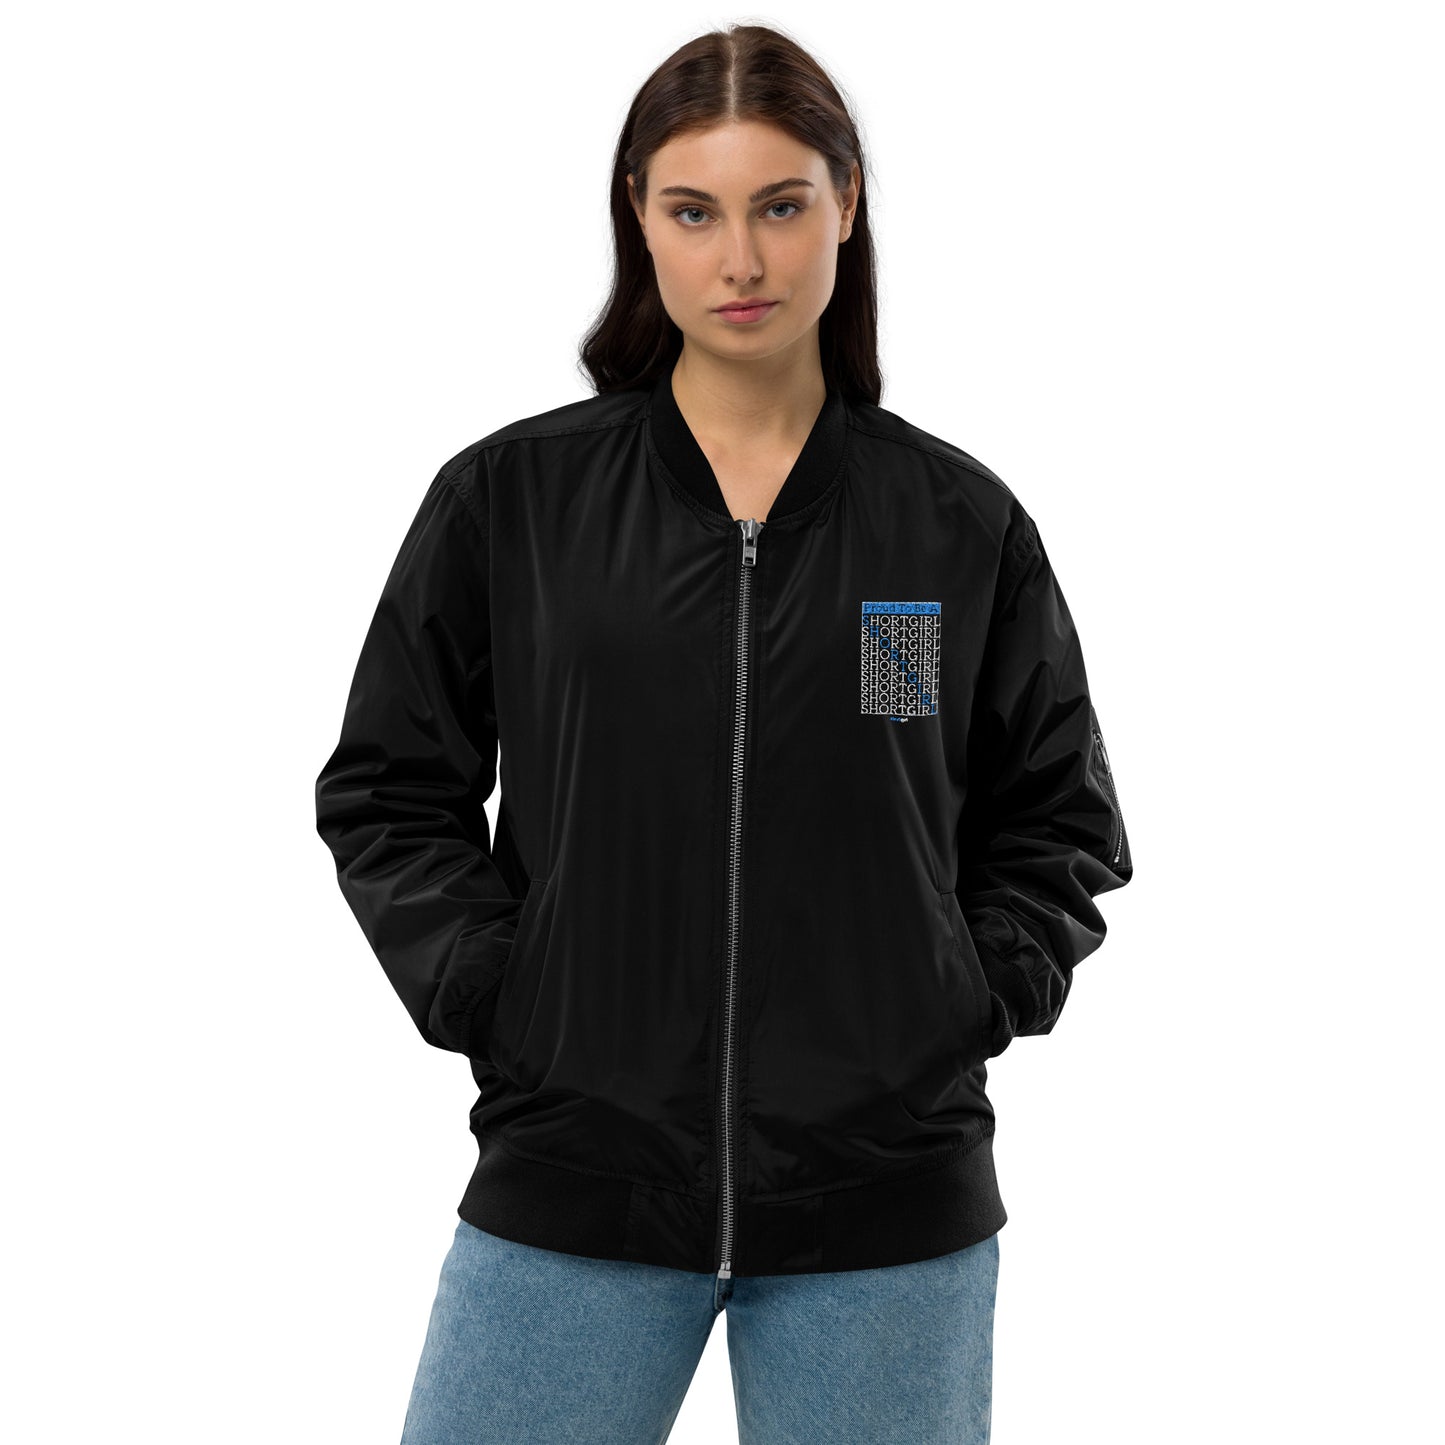 Premium recycled bomber jacket - Proud to be a shortgirl